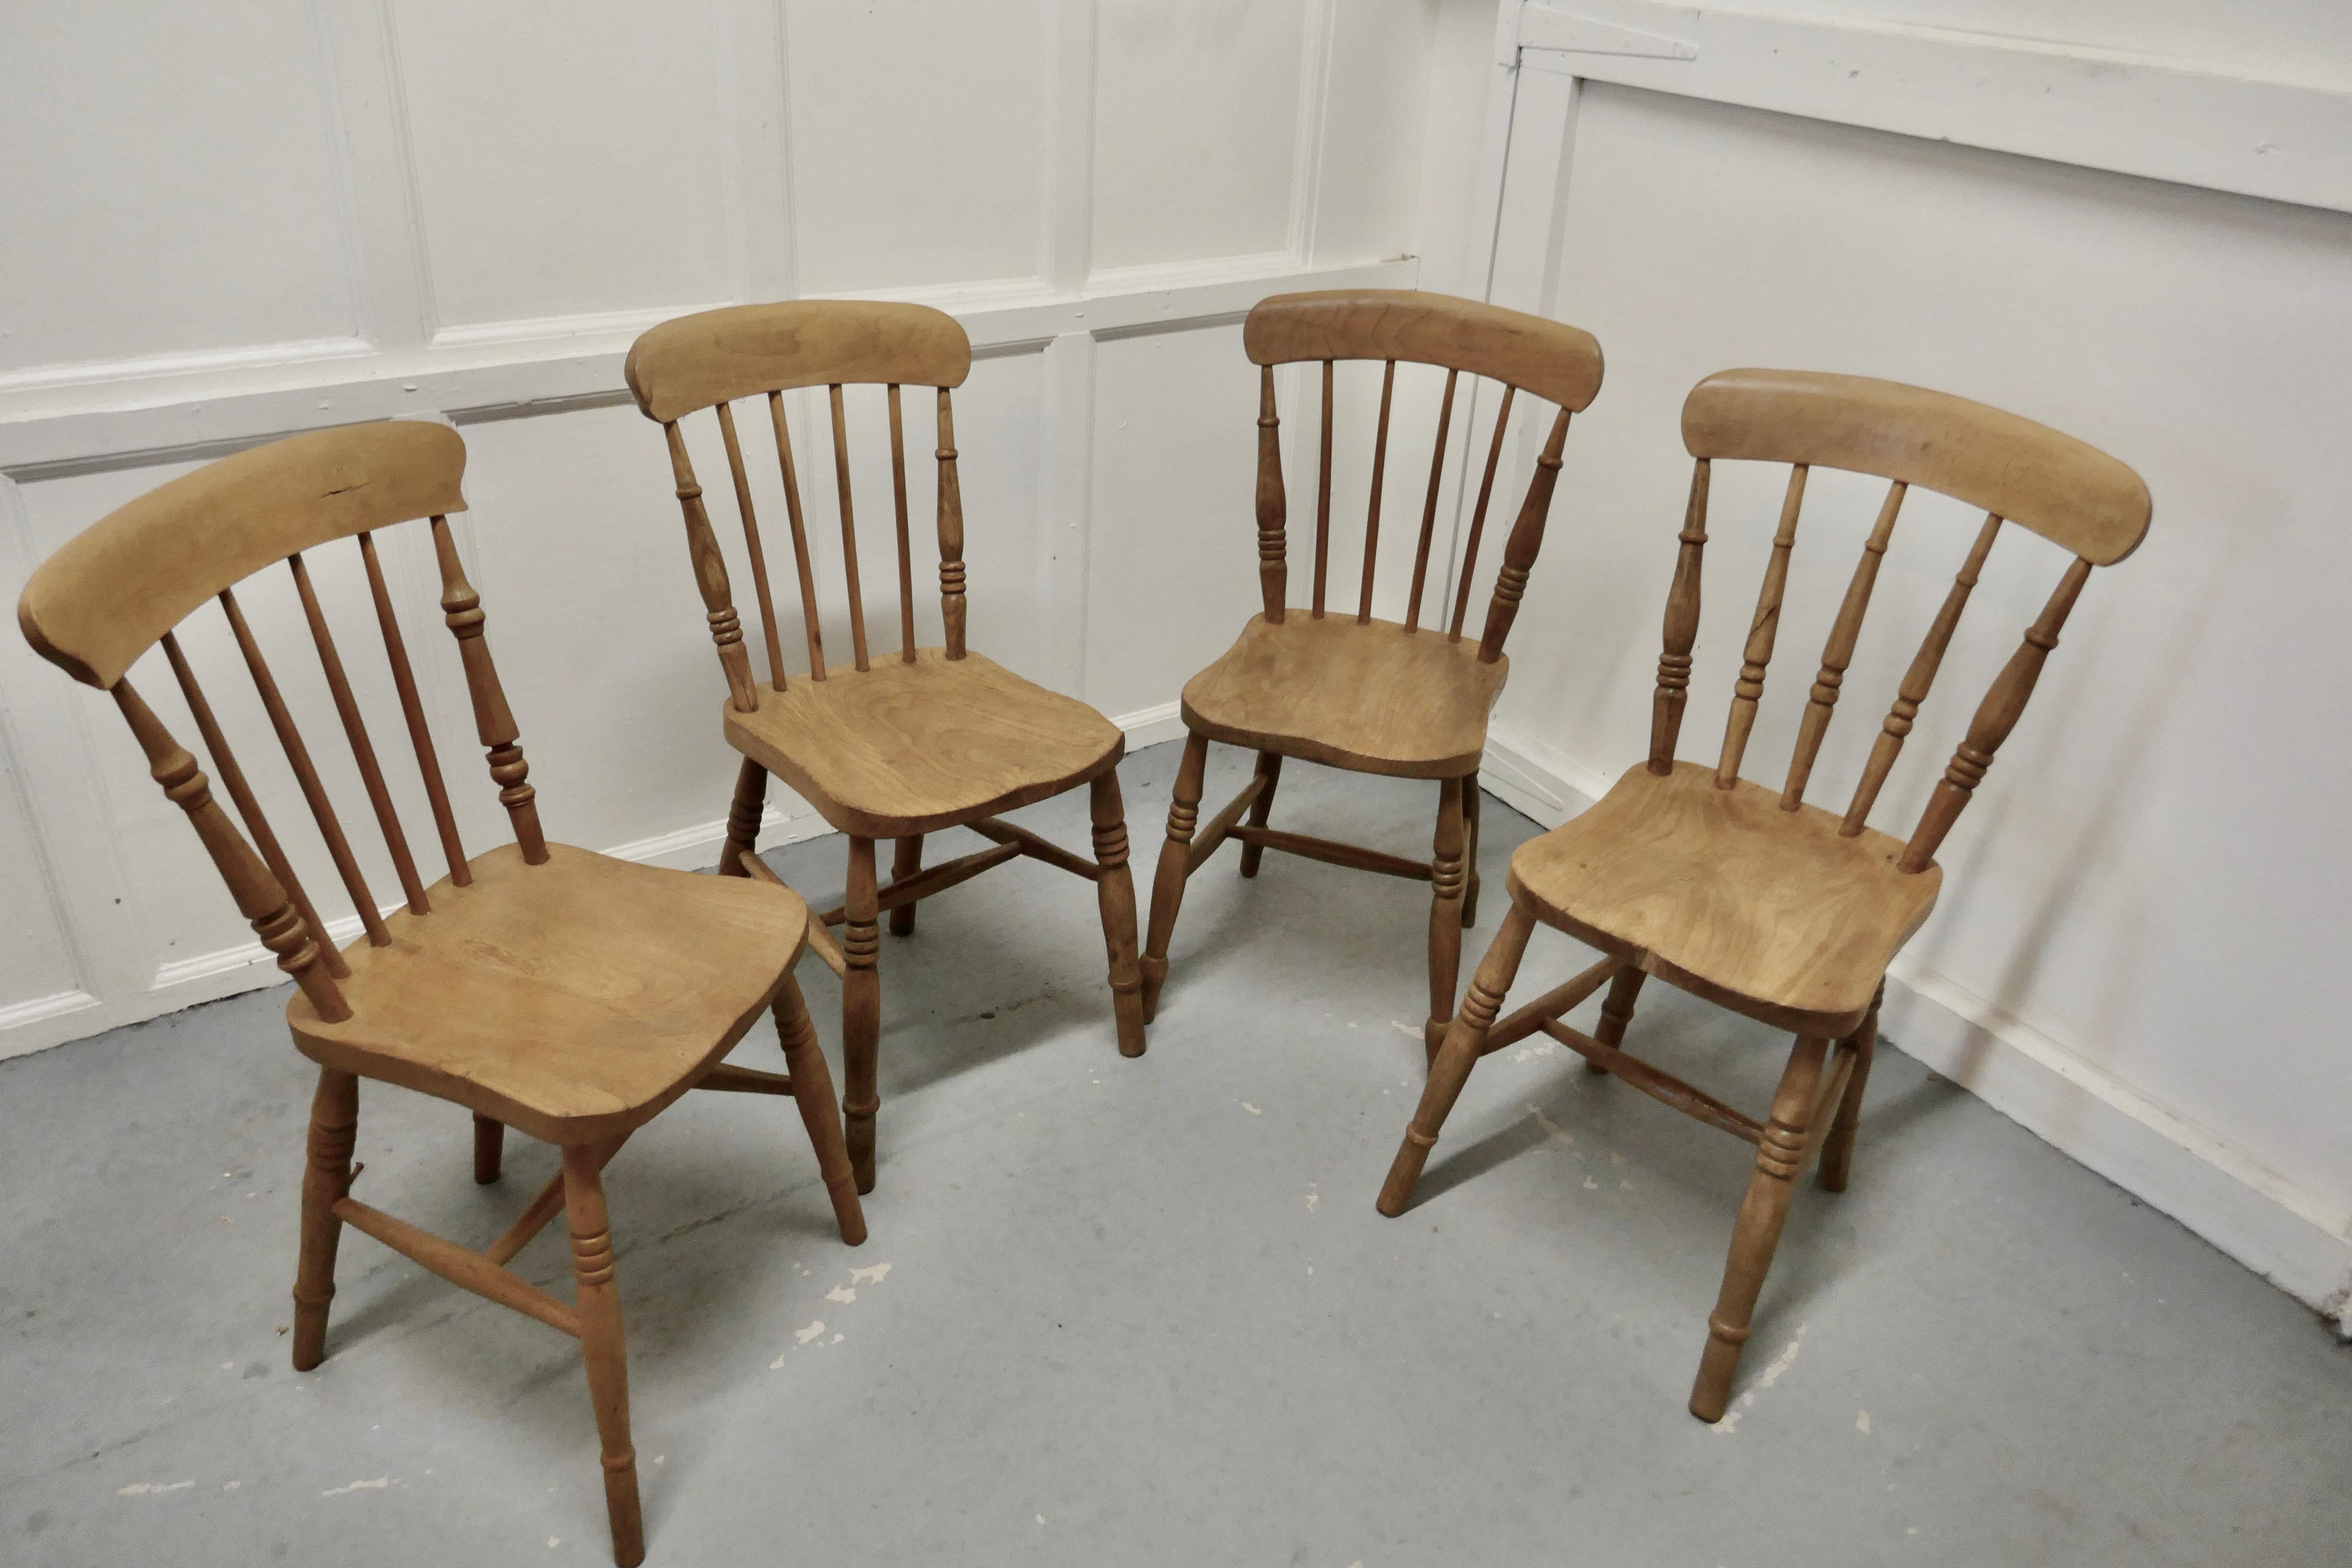 Set of 4 Victorian elm seated stick back kitchen dining chairs

This is a harlequin set of chairs meaning that there are very slight differences in the turnings, the chairs are a classic design and traditionally made from solid wood they have a